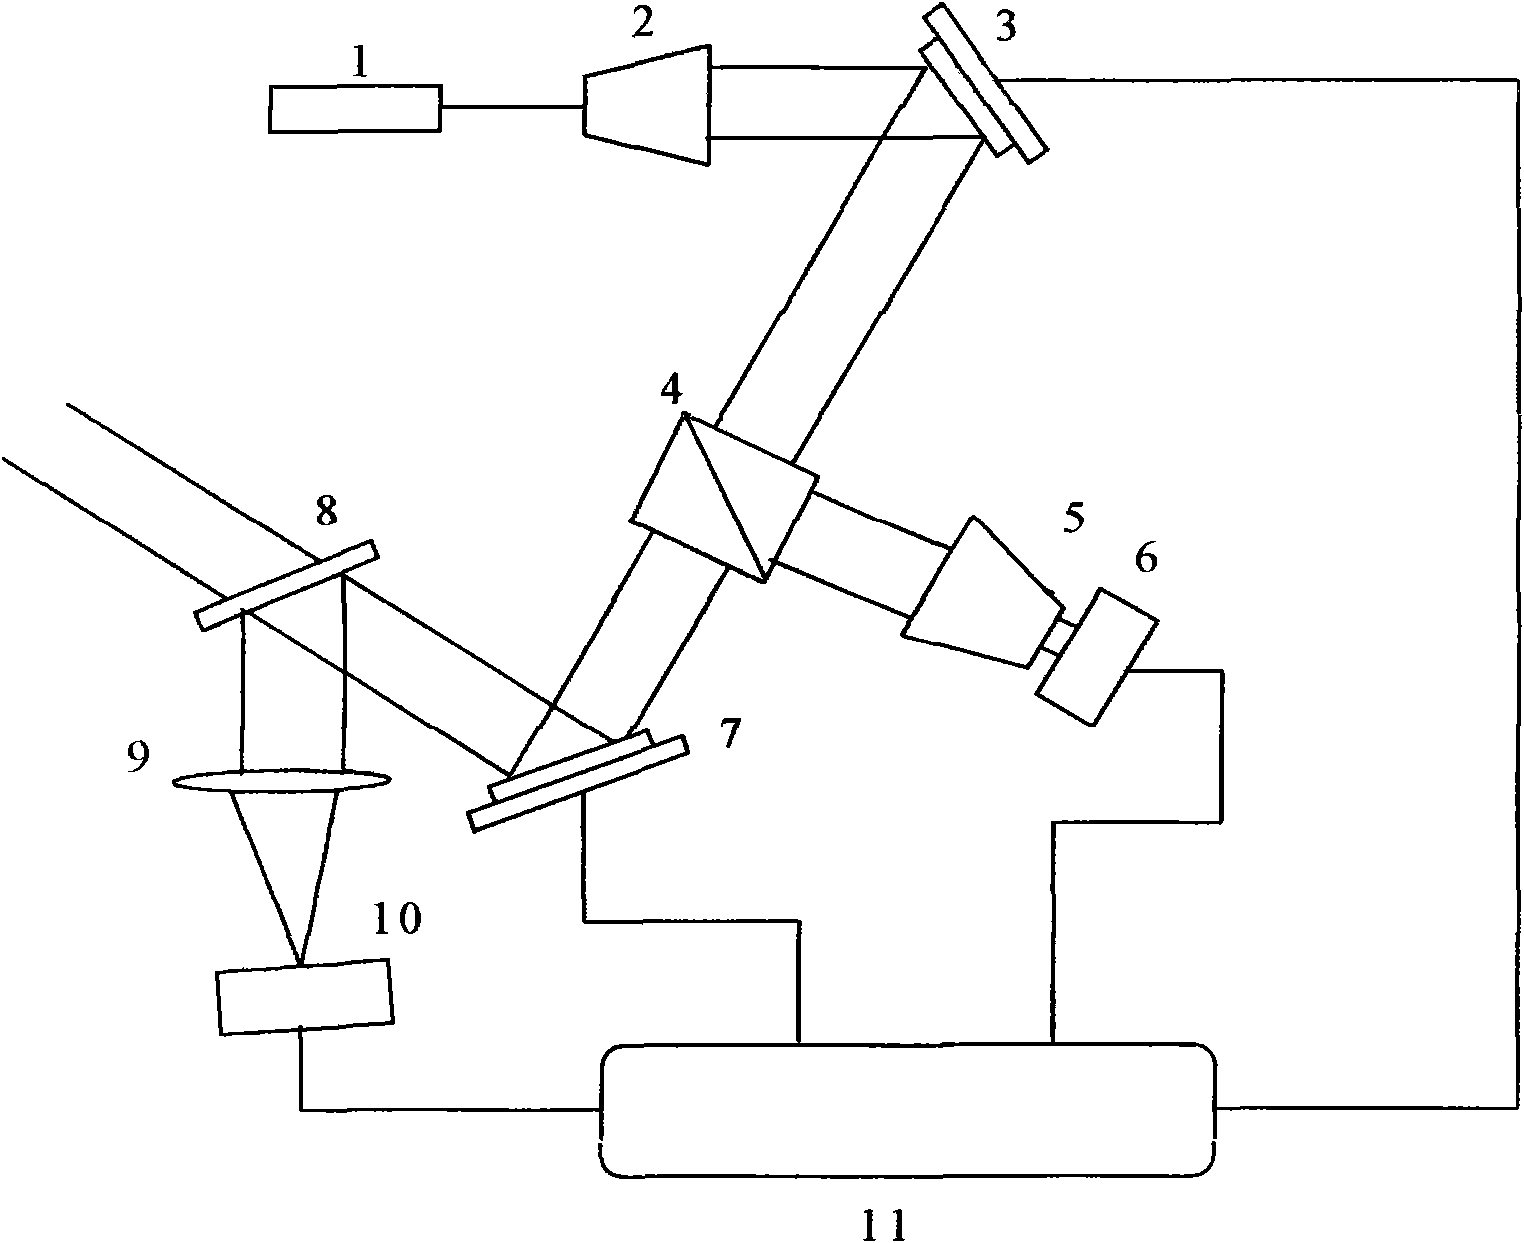 New method and device for arbitrary beam shaping